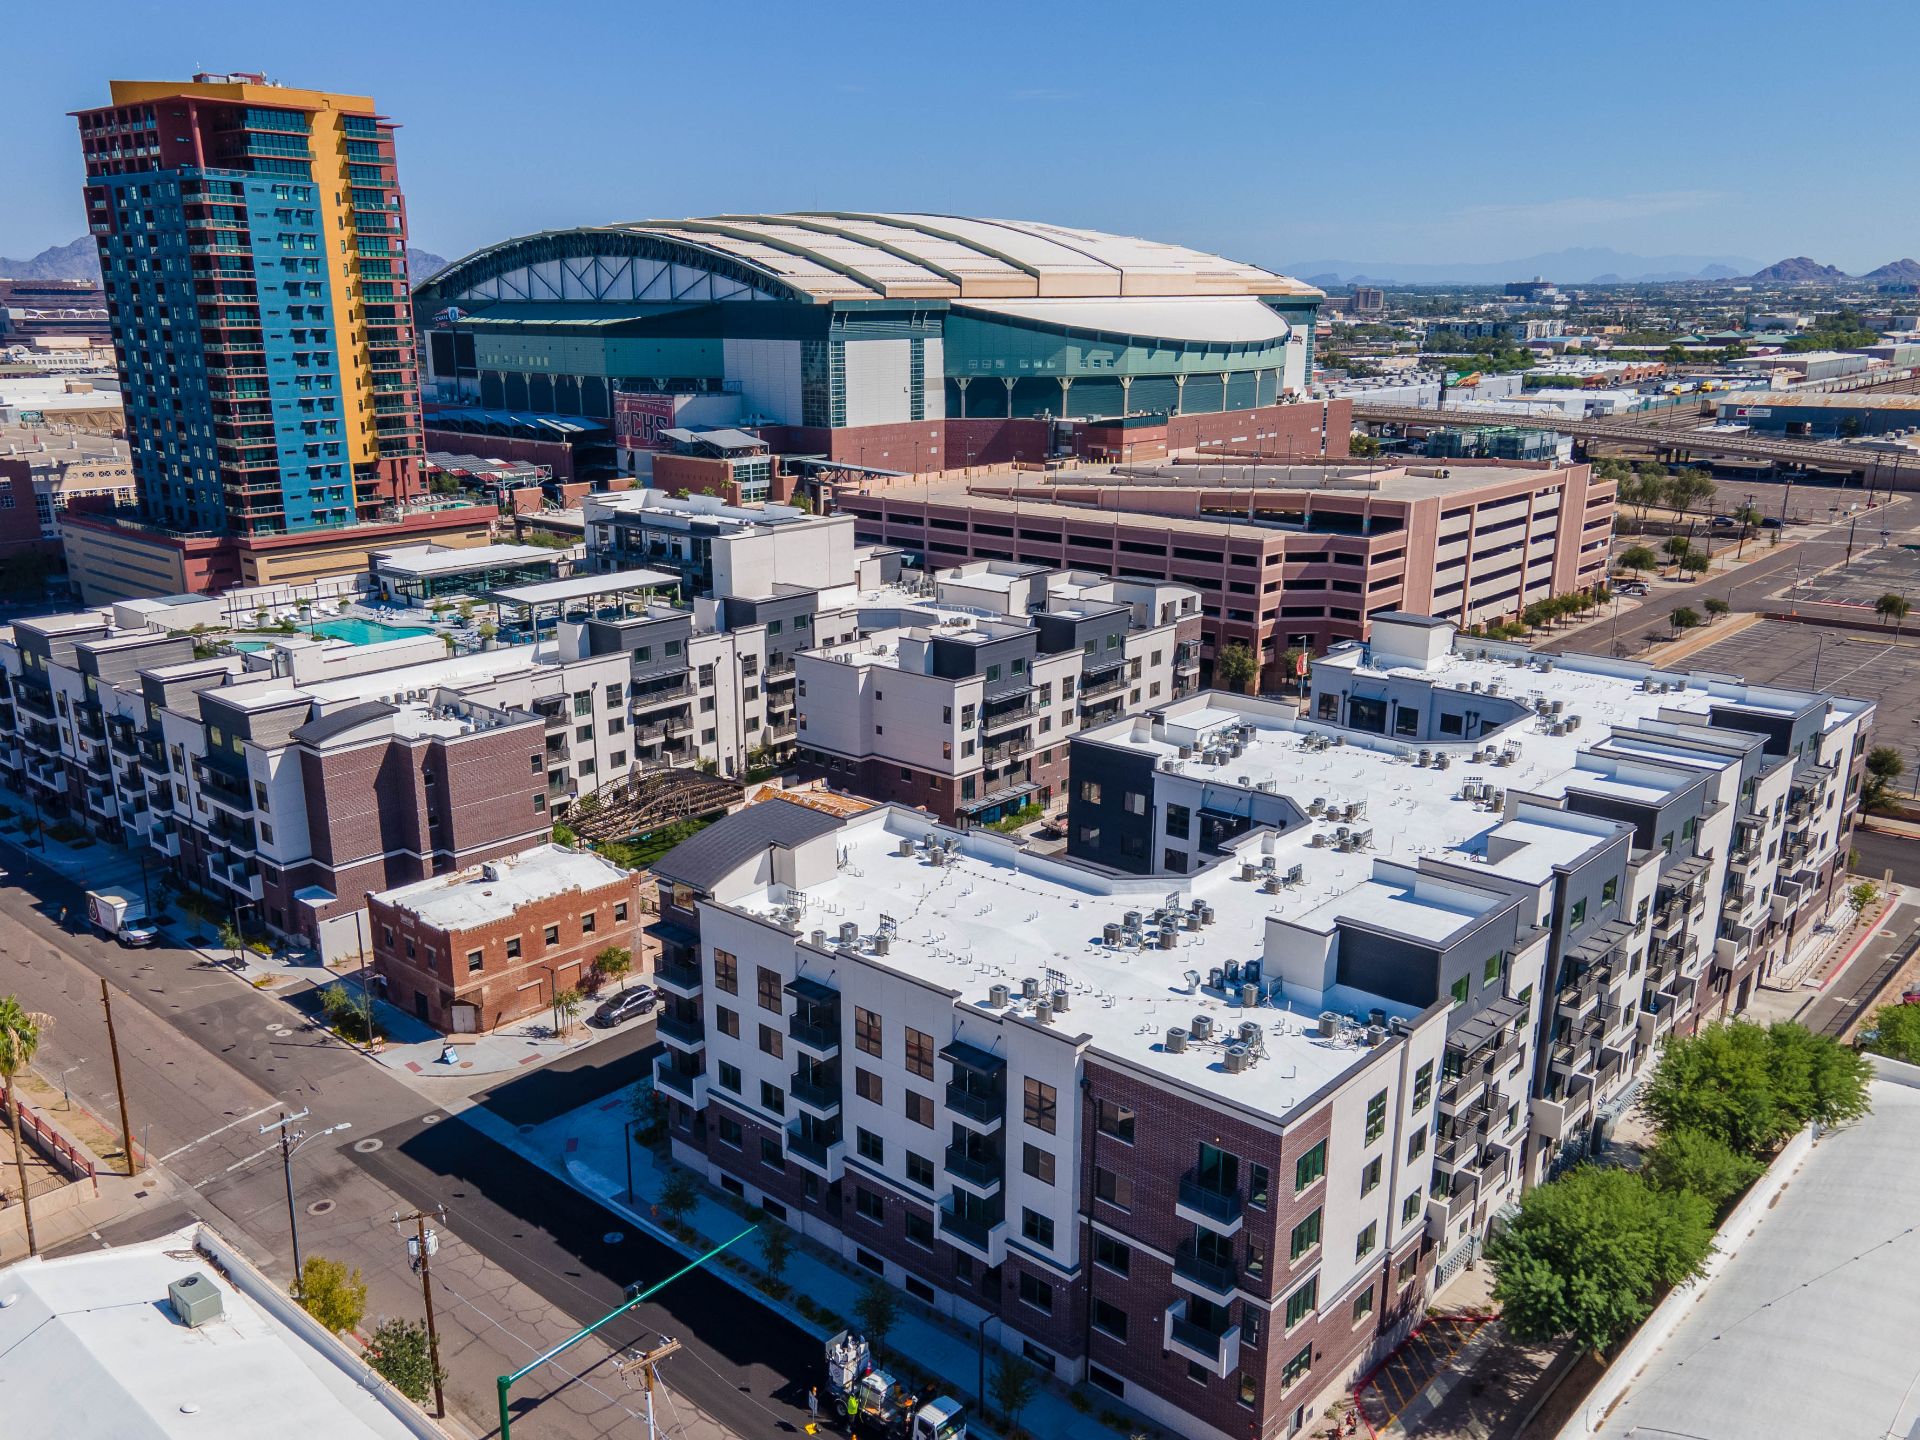 aerial image and downtown phoenix